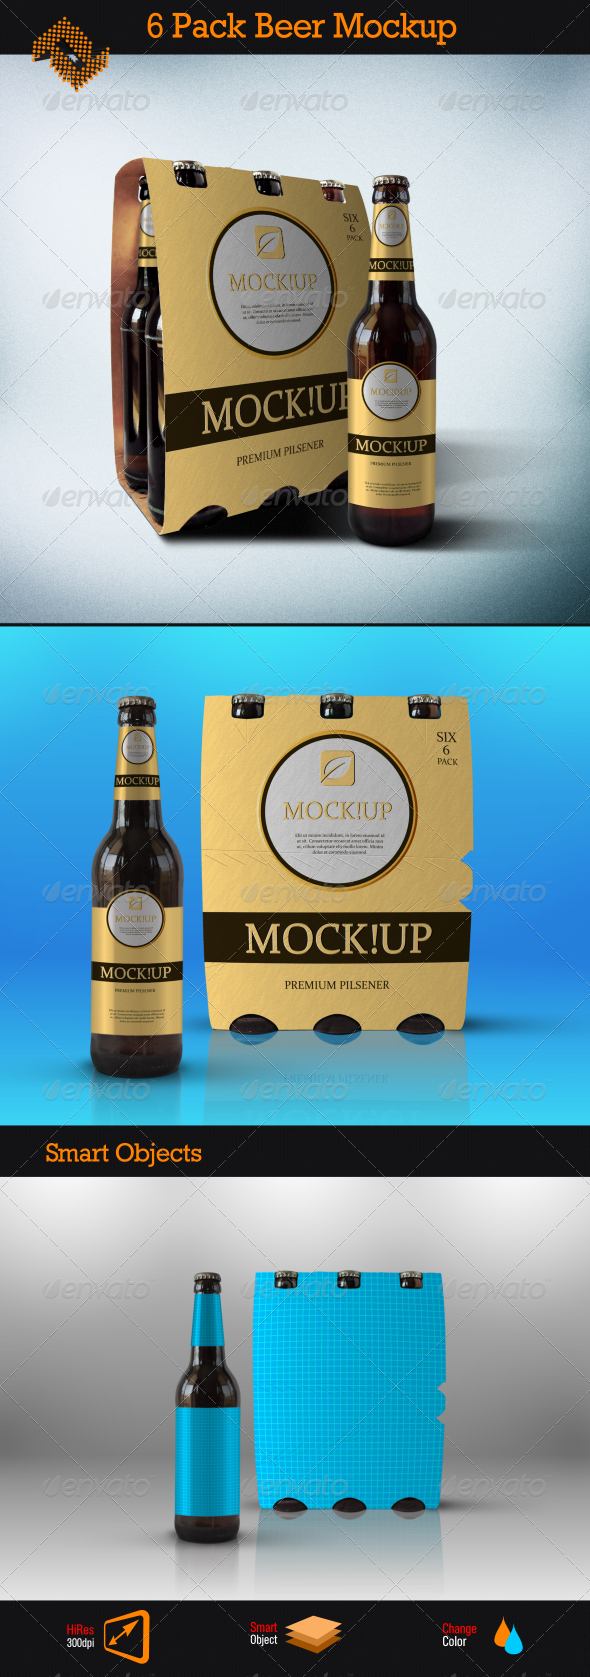 Download 6 Pack Beer Mockup By Fusionhorn Graphicriver